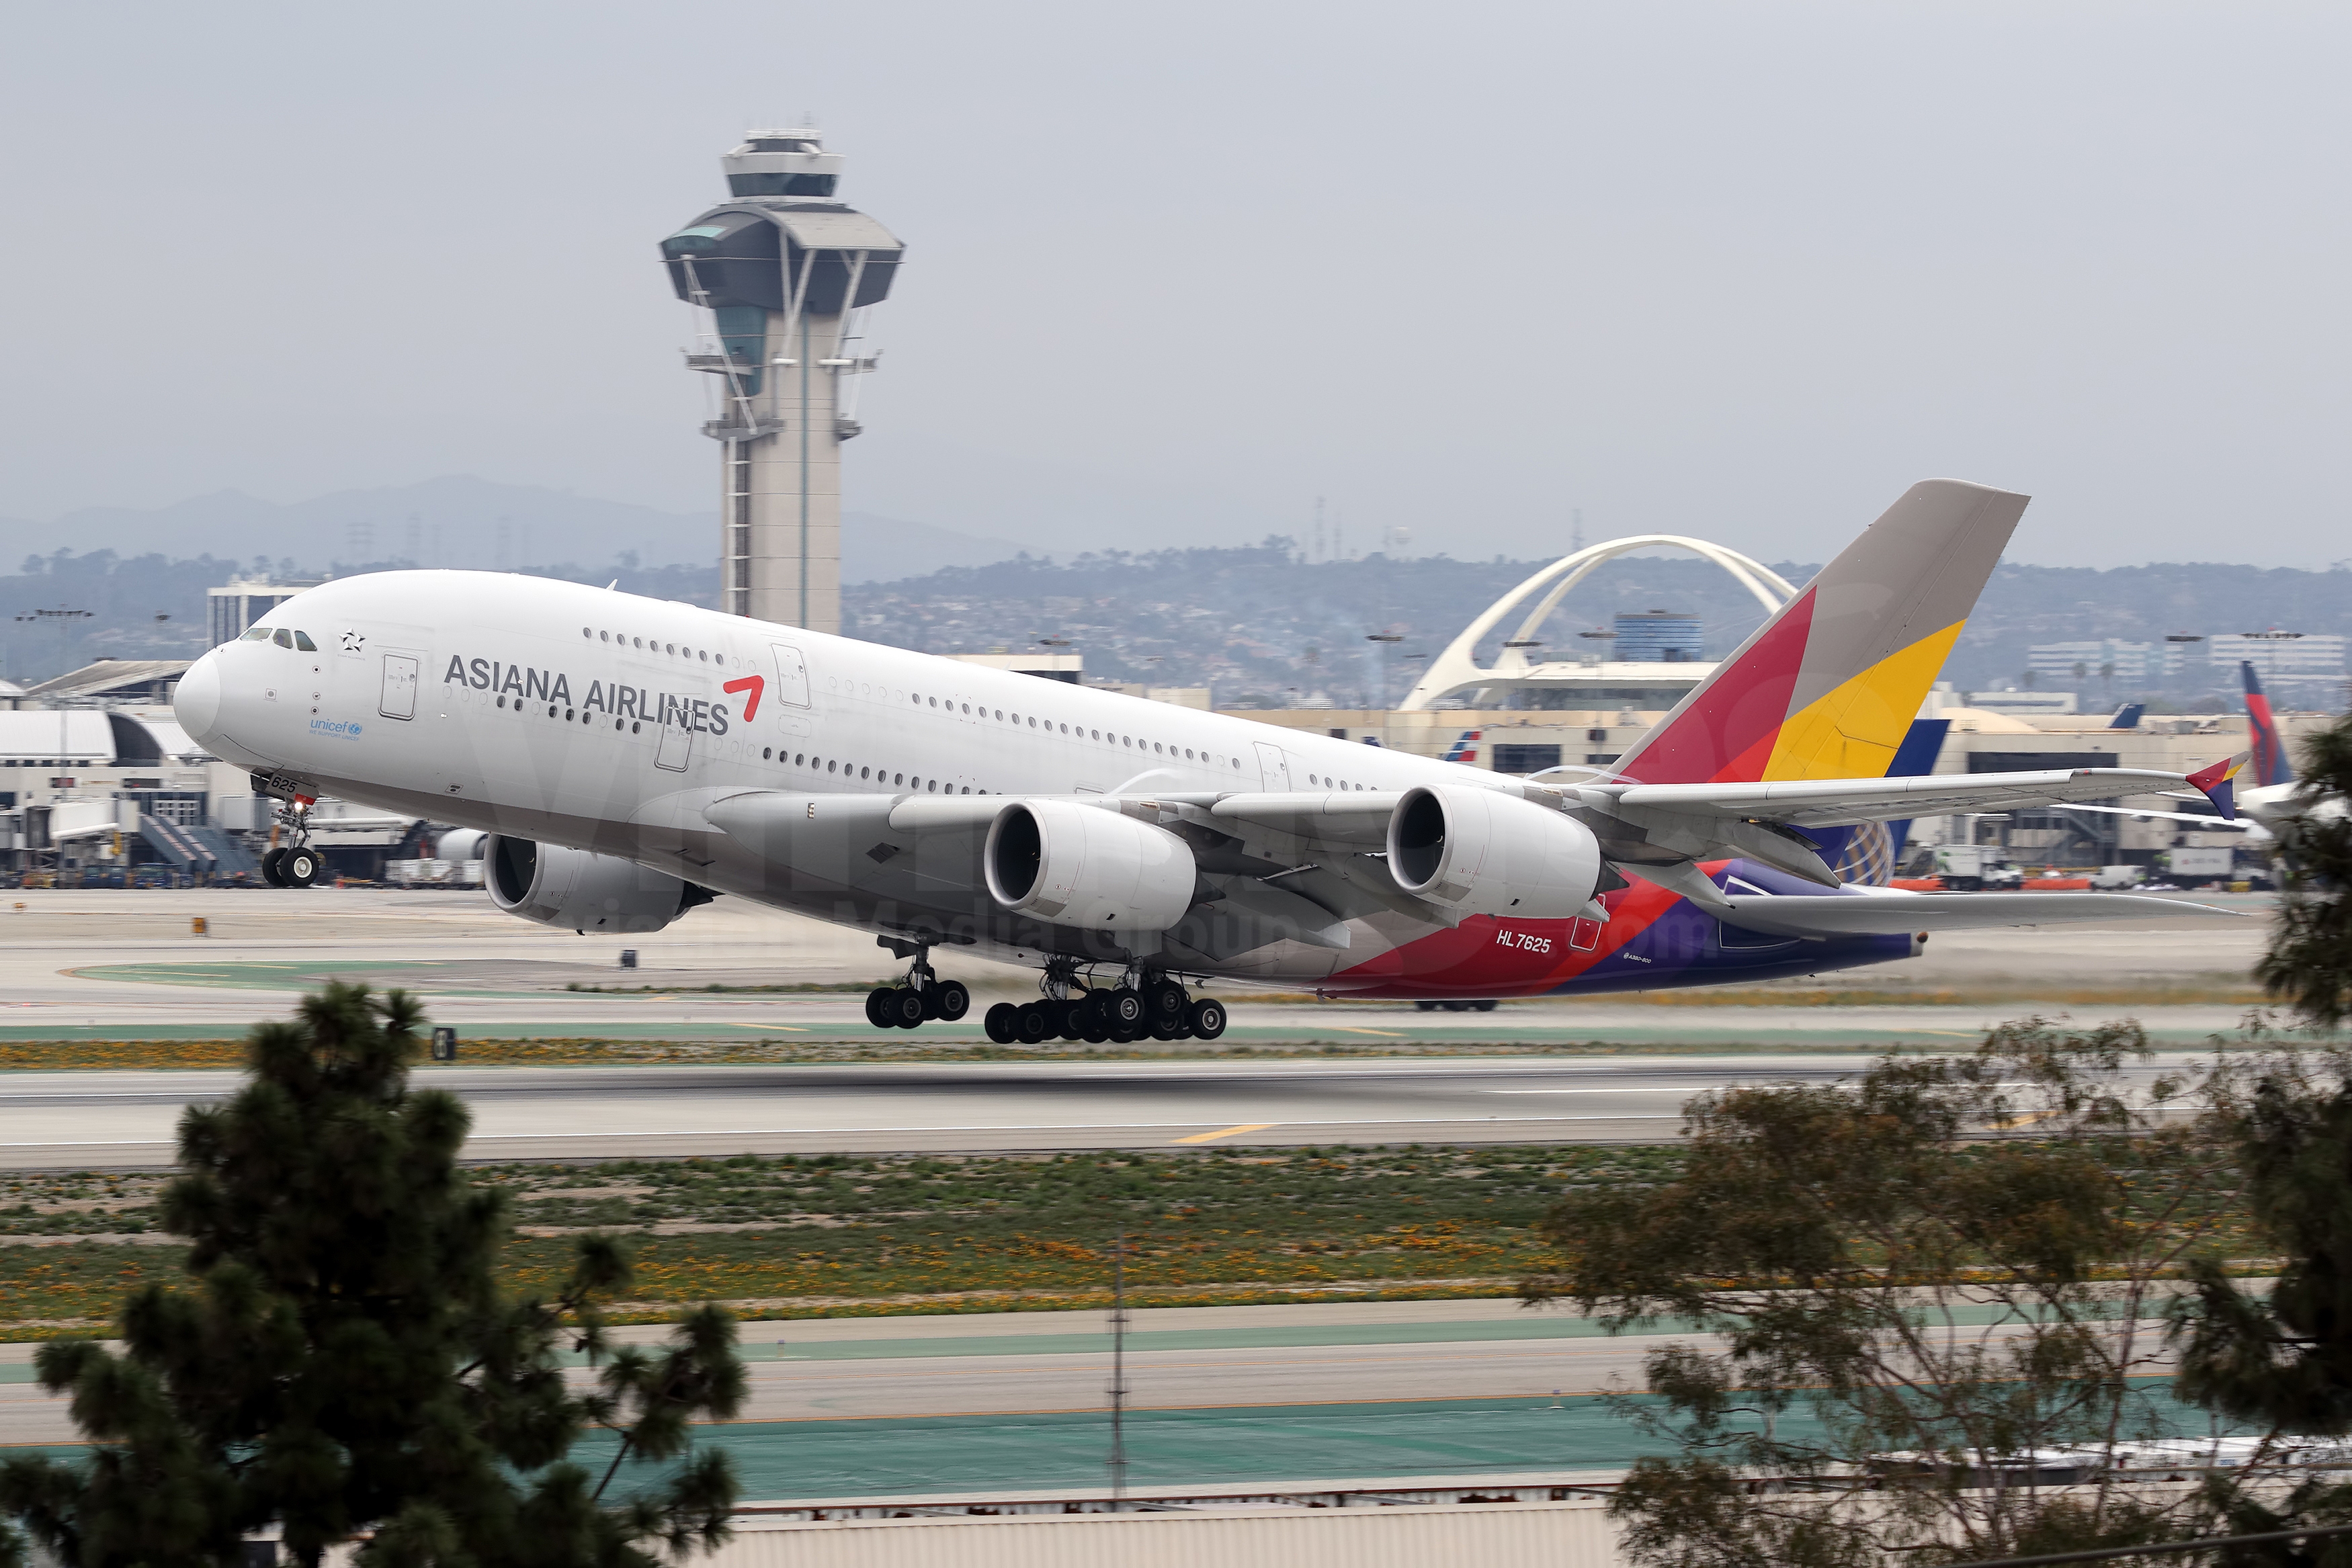 B c asia. Asiana Airlines самолеты. A380 Asiana Airlines. Airbus a380-841. Рейс 214 Asiana Airlines.